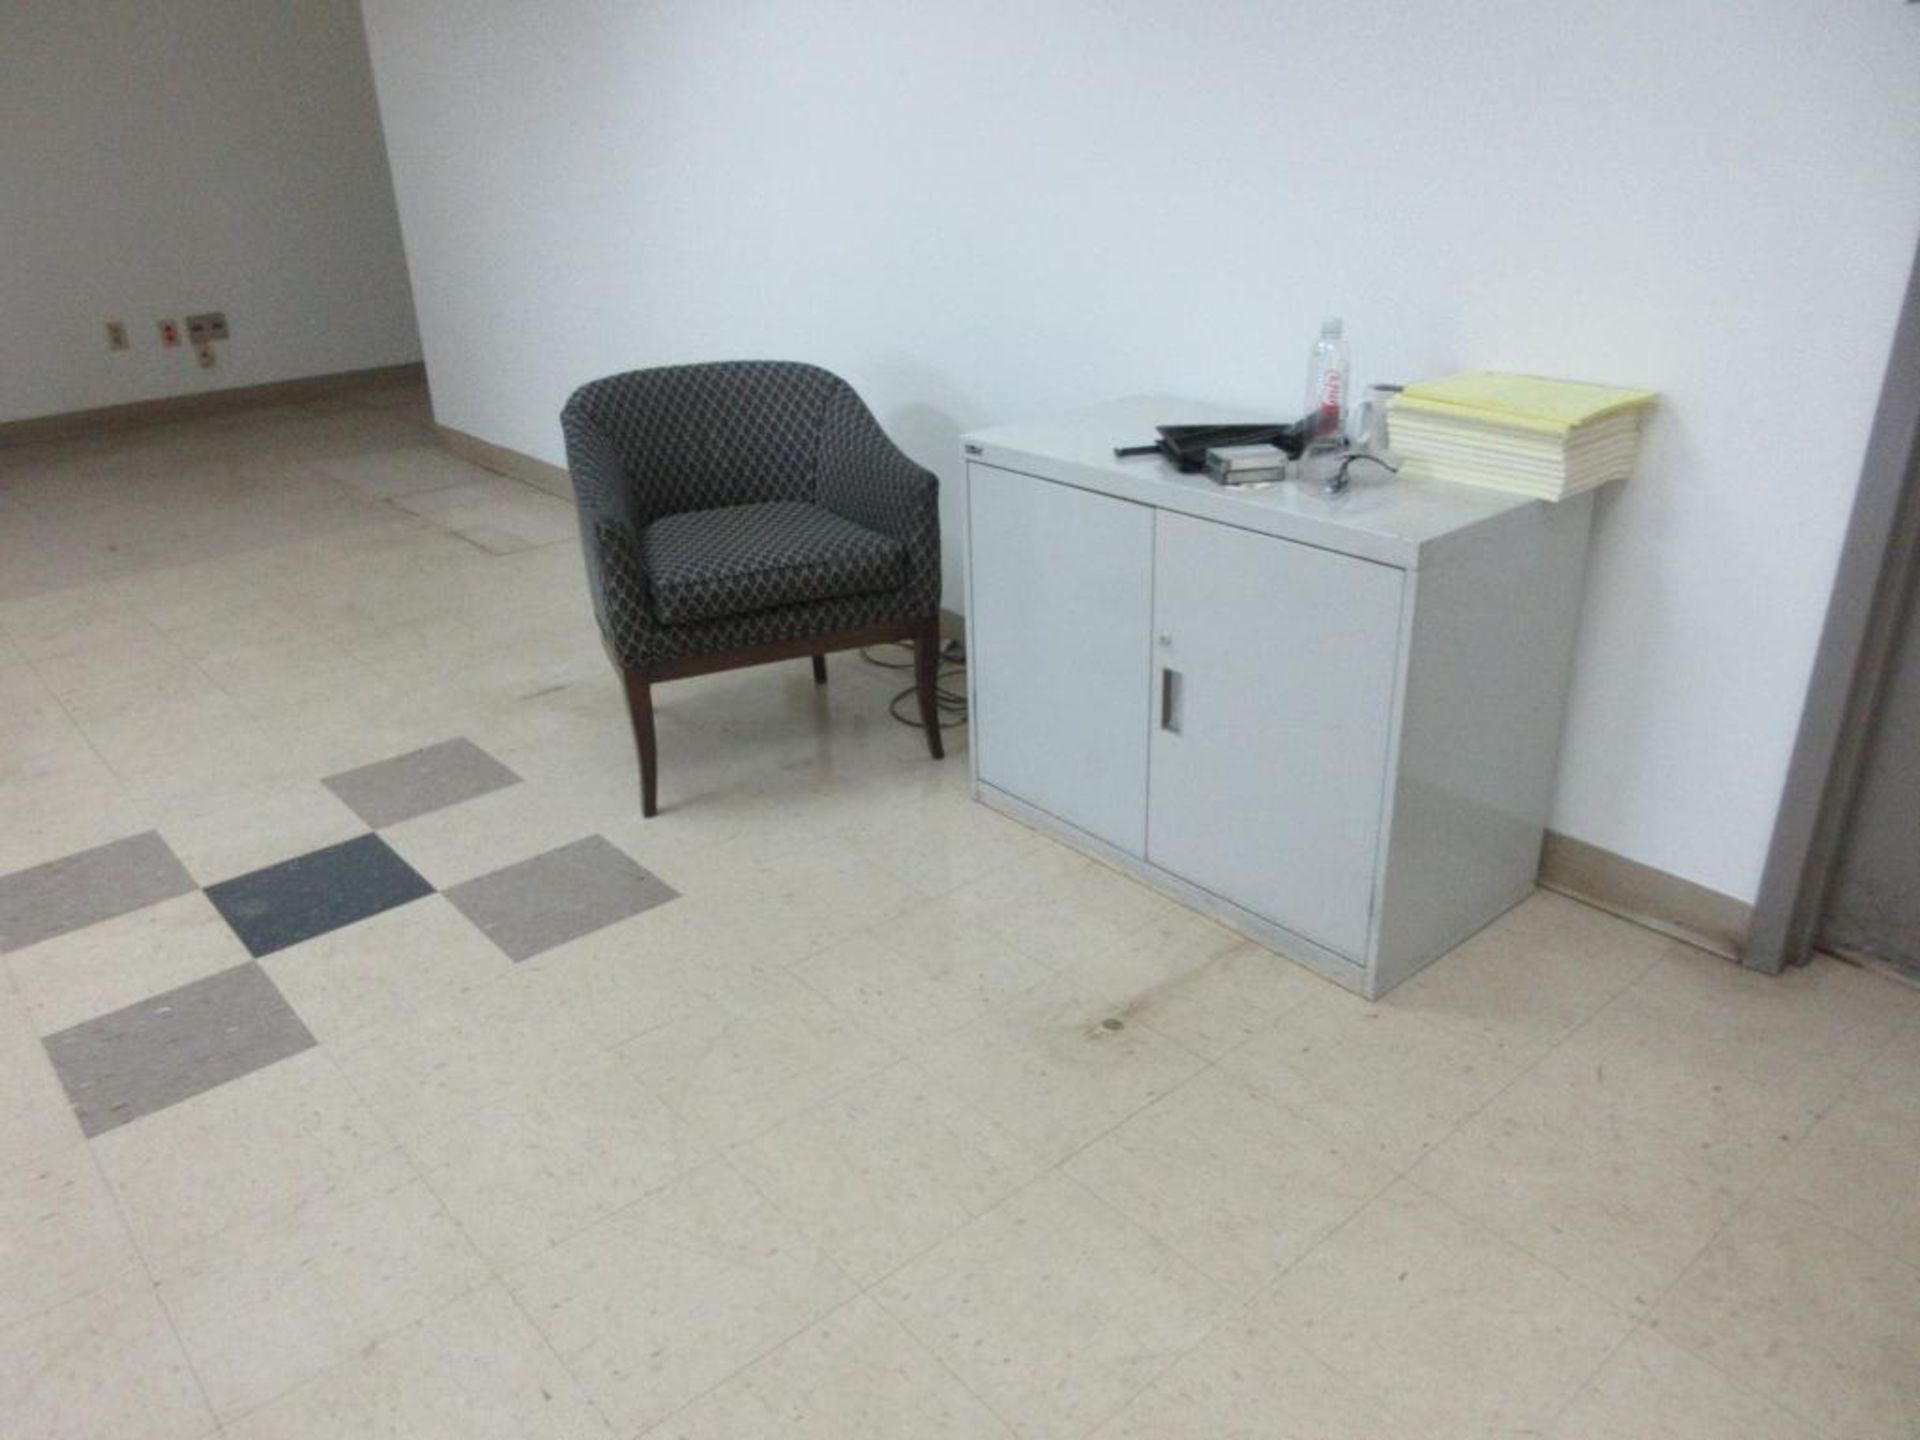 CONTENTS OF WORK AREA INCL 2 DESKS, 9 CHAIRS, 4 FILE CABINETS (OFFICES 2ND FLOOR) - Image 4 of 8